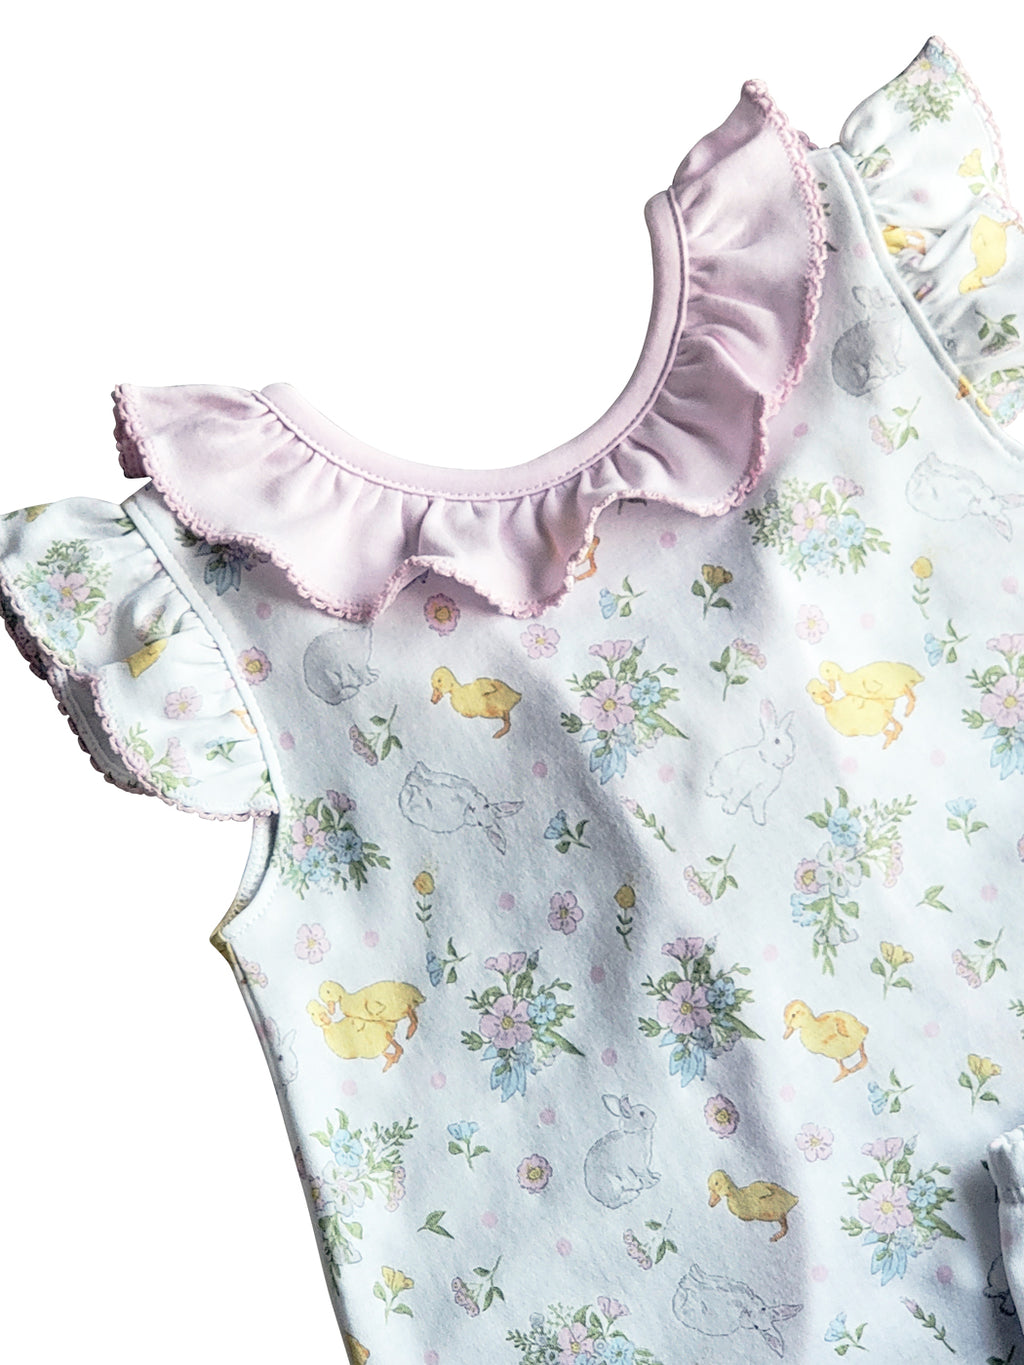 Easter Floral Baby Girl Popover Set Pima Cotton - Little Threads Inc. Children's Clothing